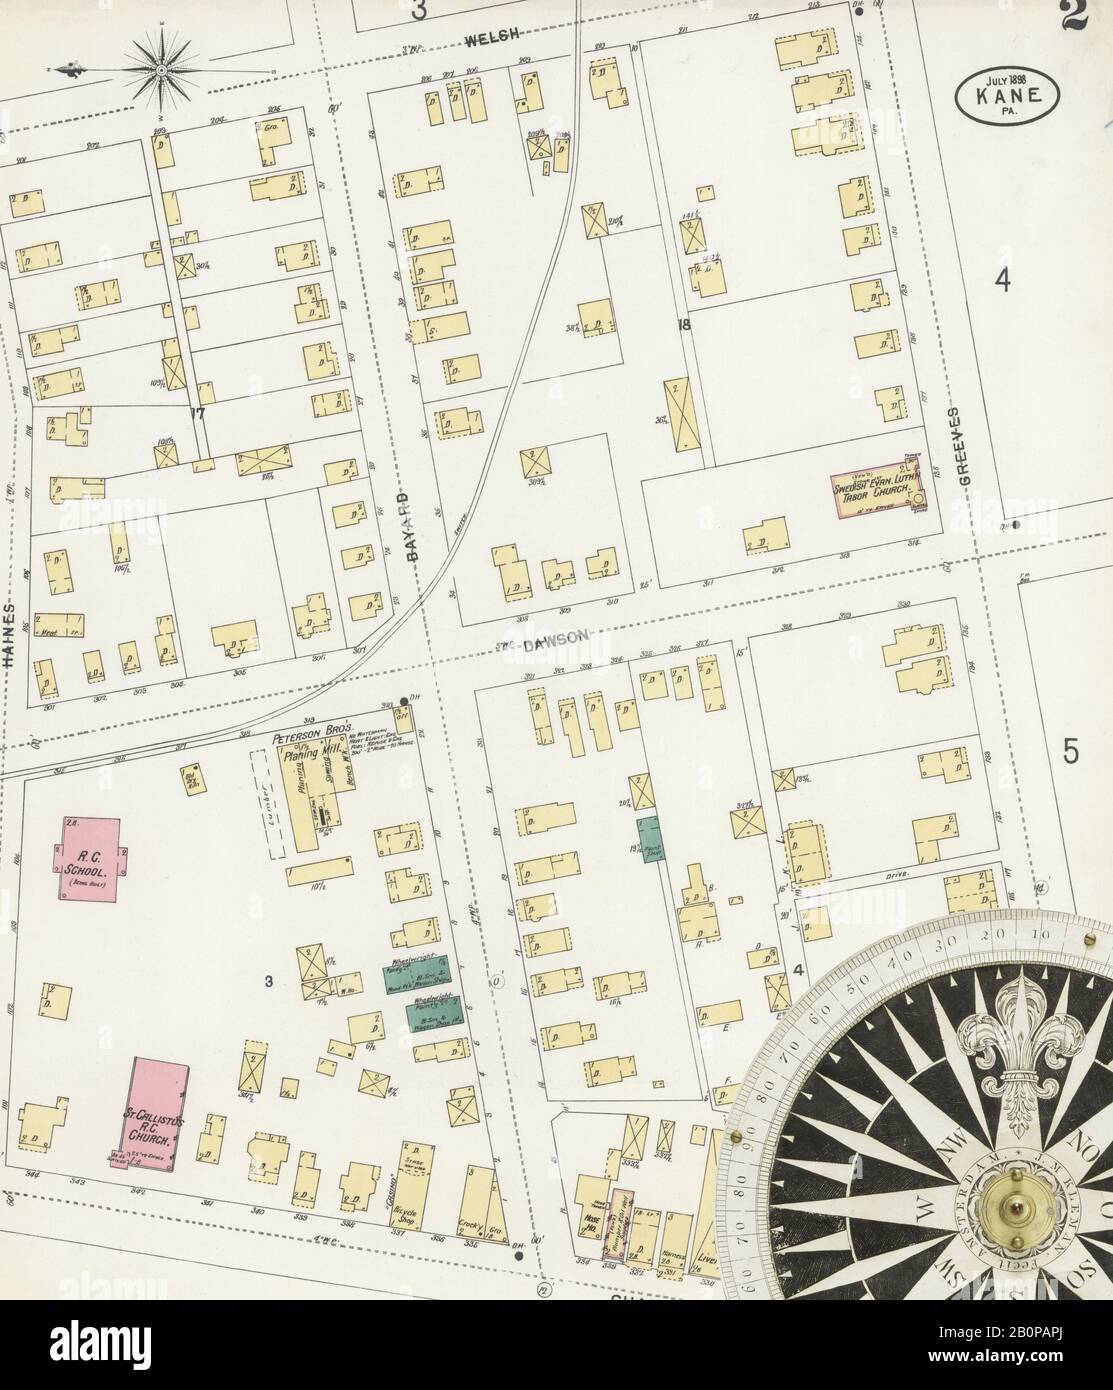 Image 2 of Sanborn Fire Insurance Map from Kane, McKean County, Pennsylvania. Jul 1898. 6 Sheet(s), America, street map with a Nineteenth Century compass Stock Photo